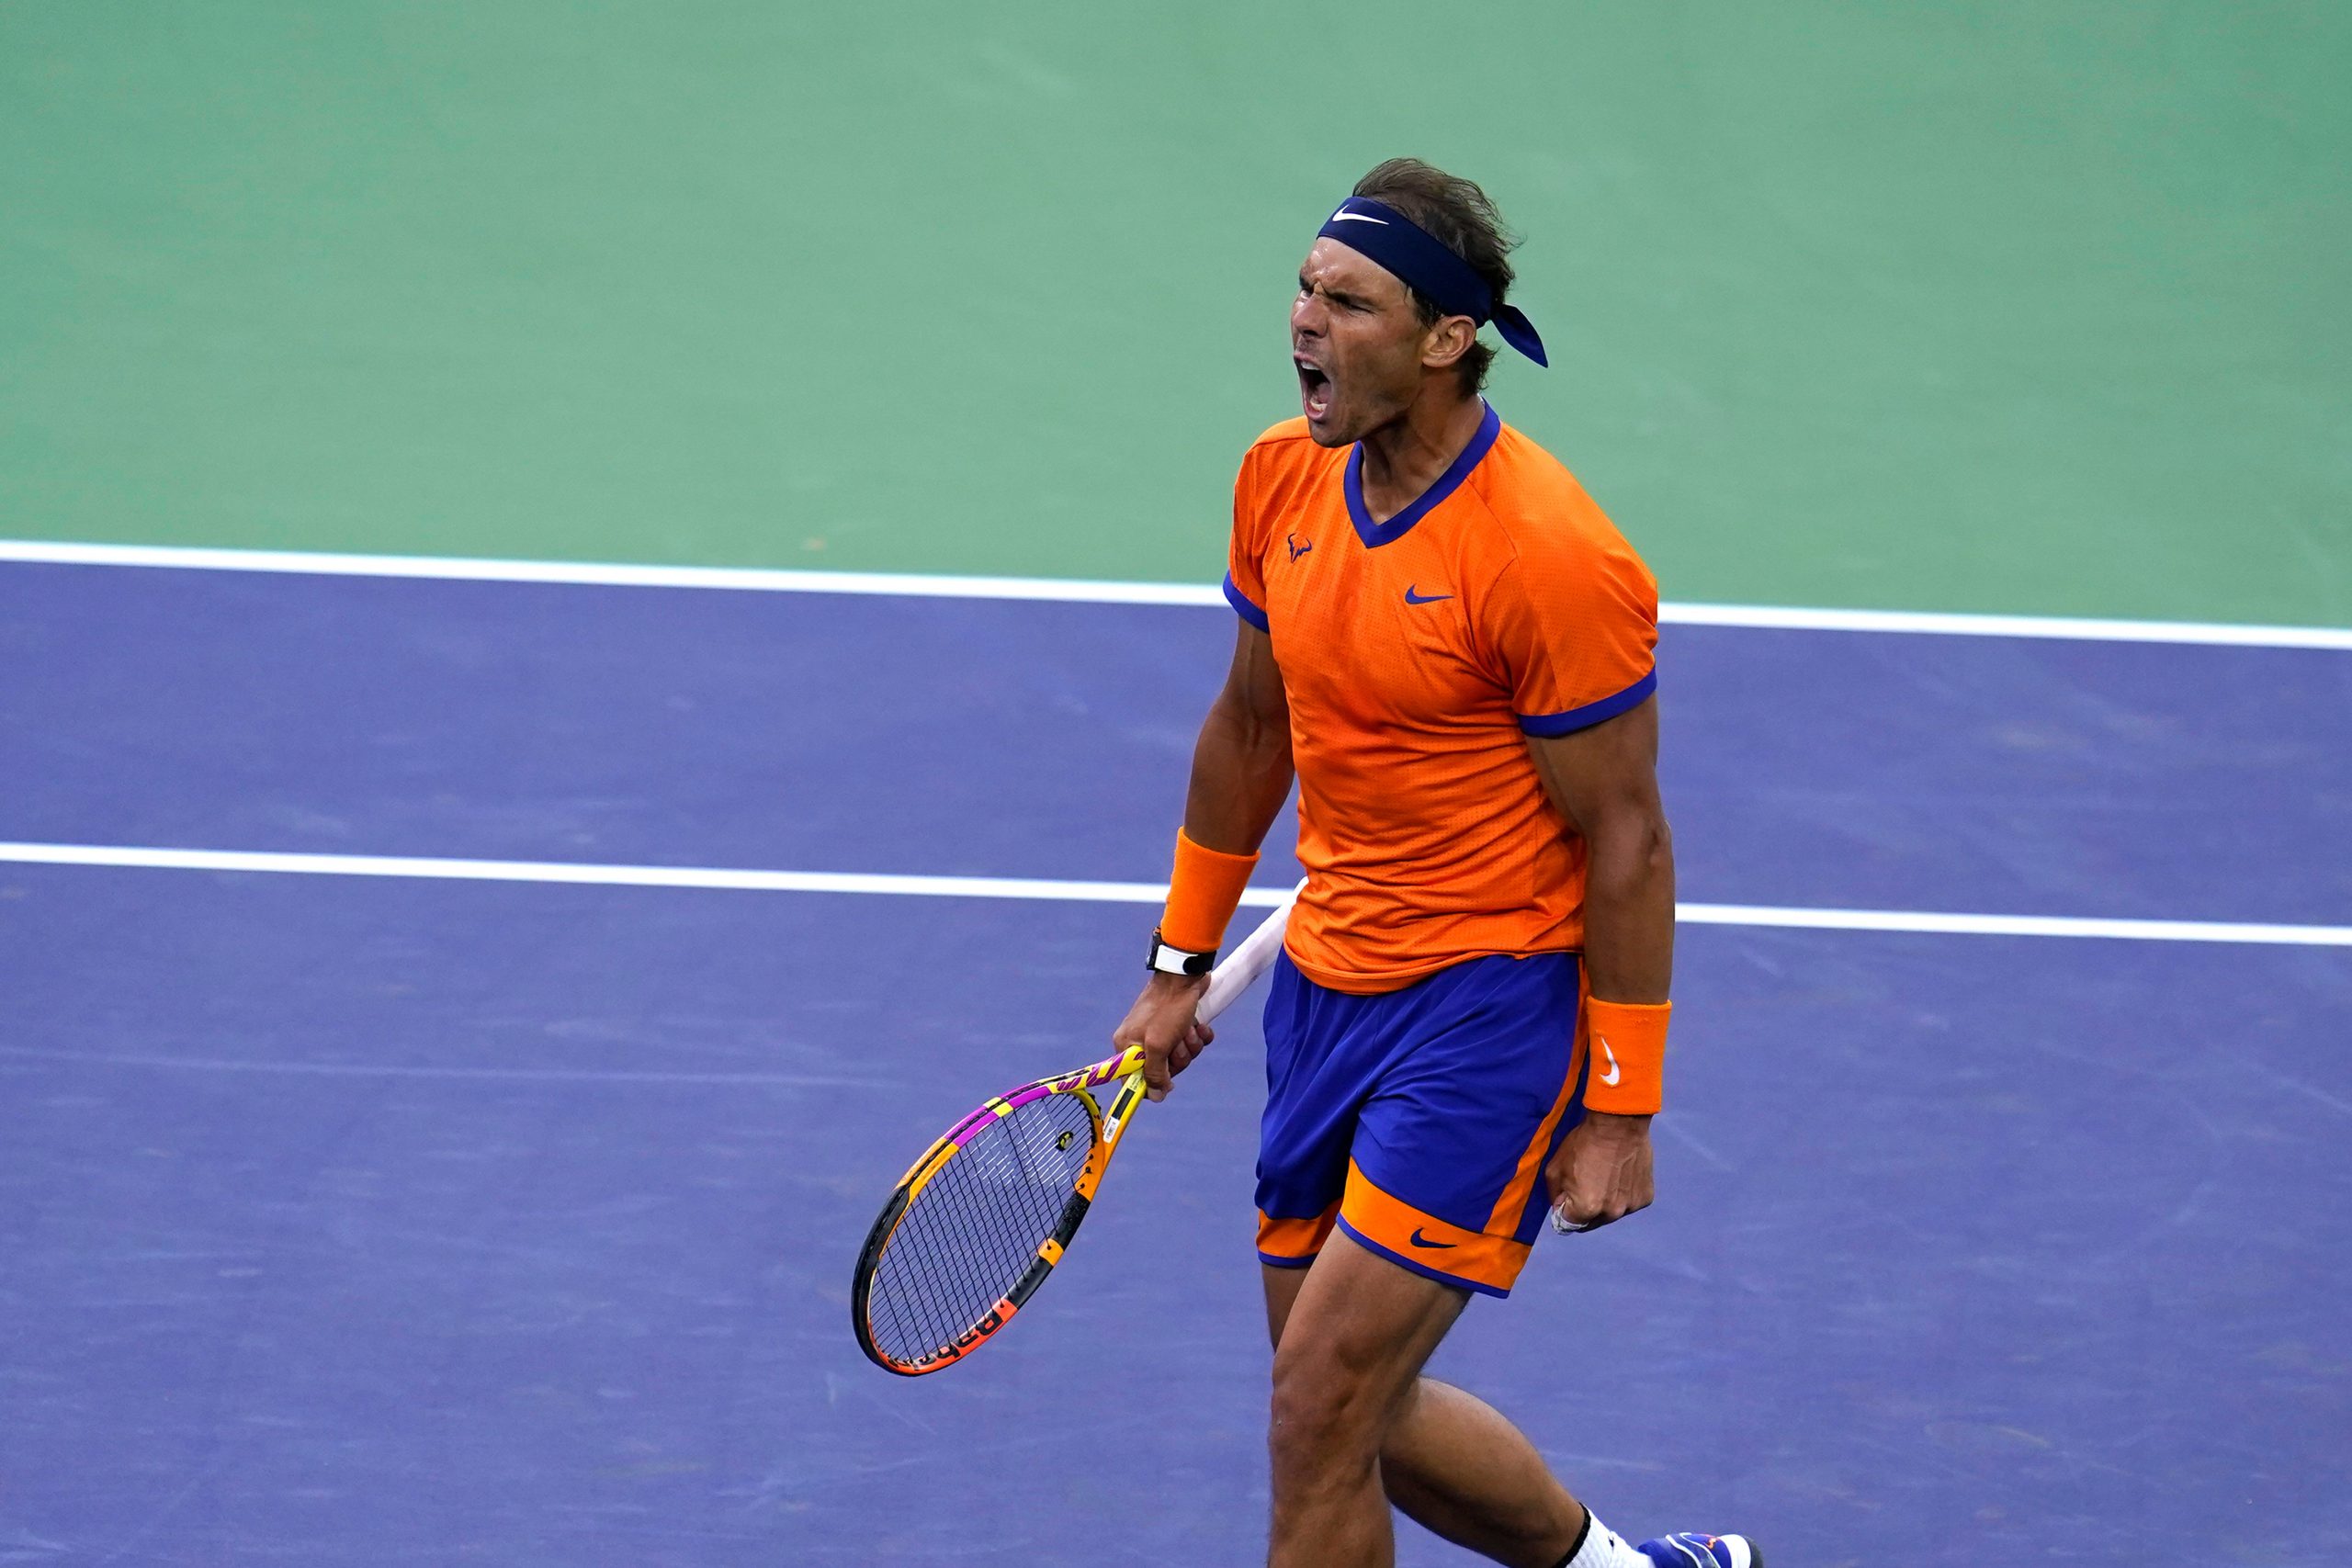 Rafael Nadal among top tennis stars to play in charity event ahead of US Open